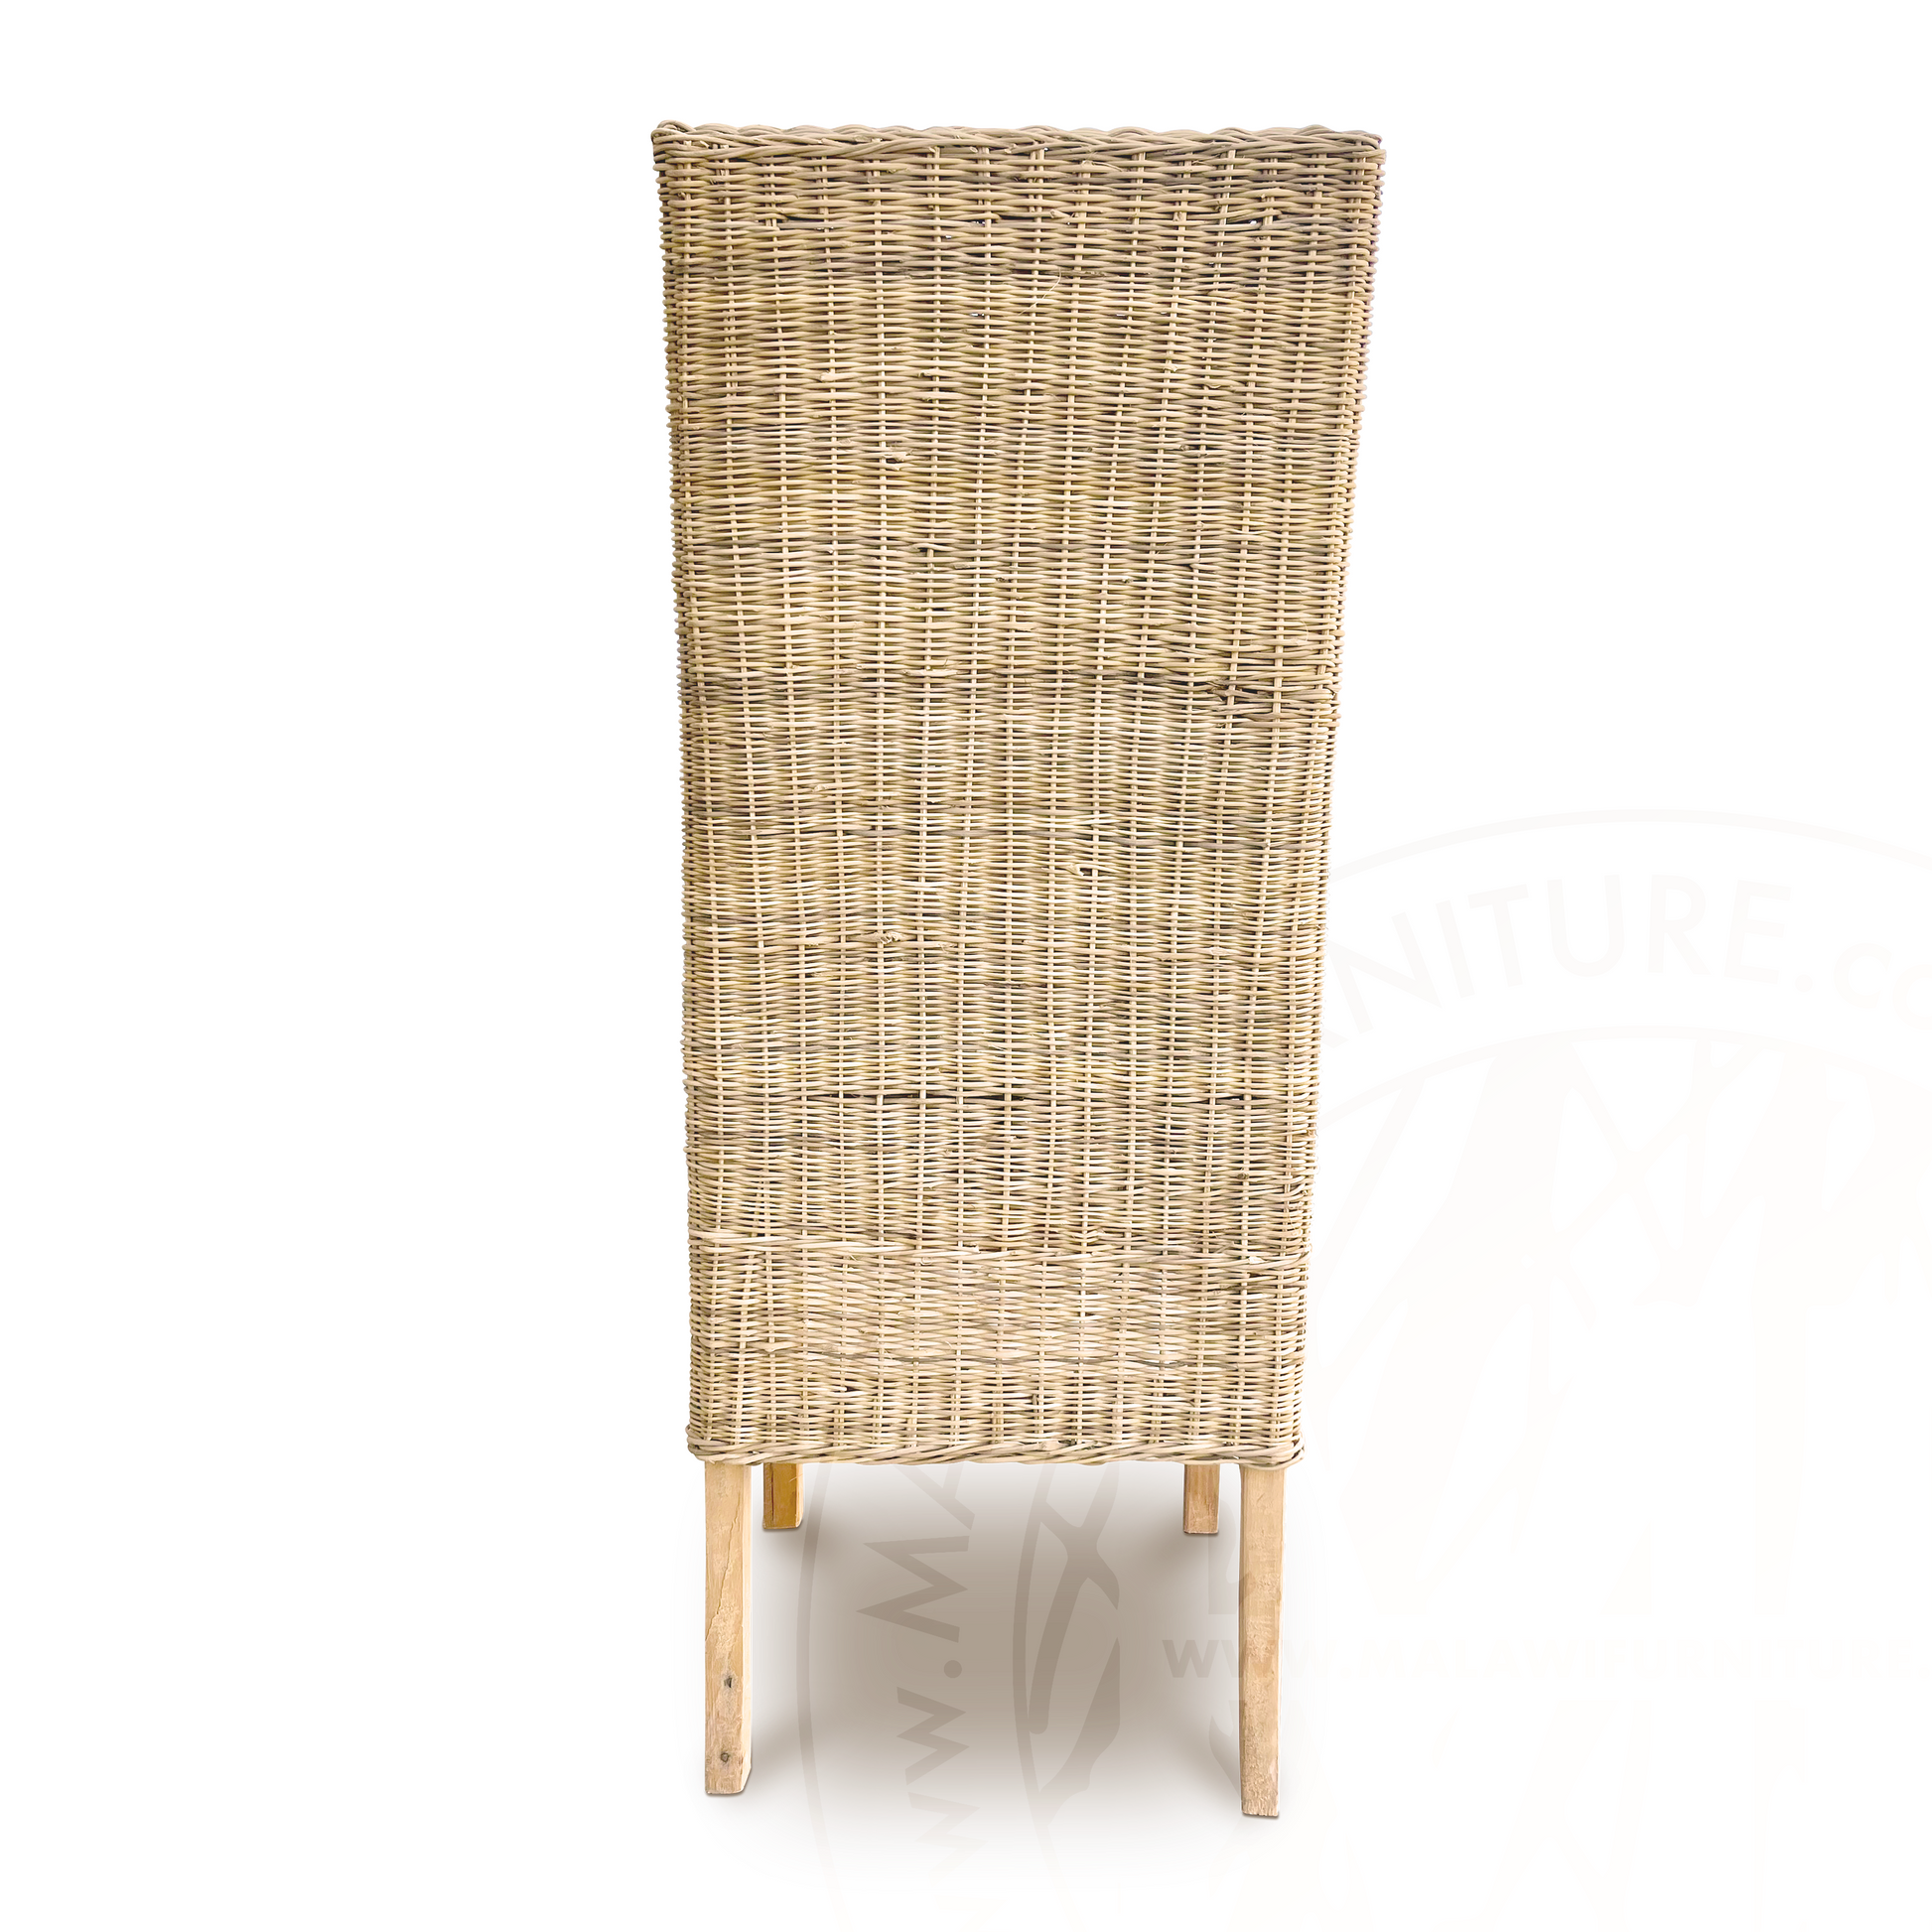 Malawi Dining Chair (Closed weave)